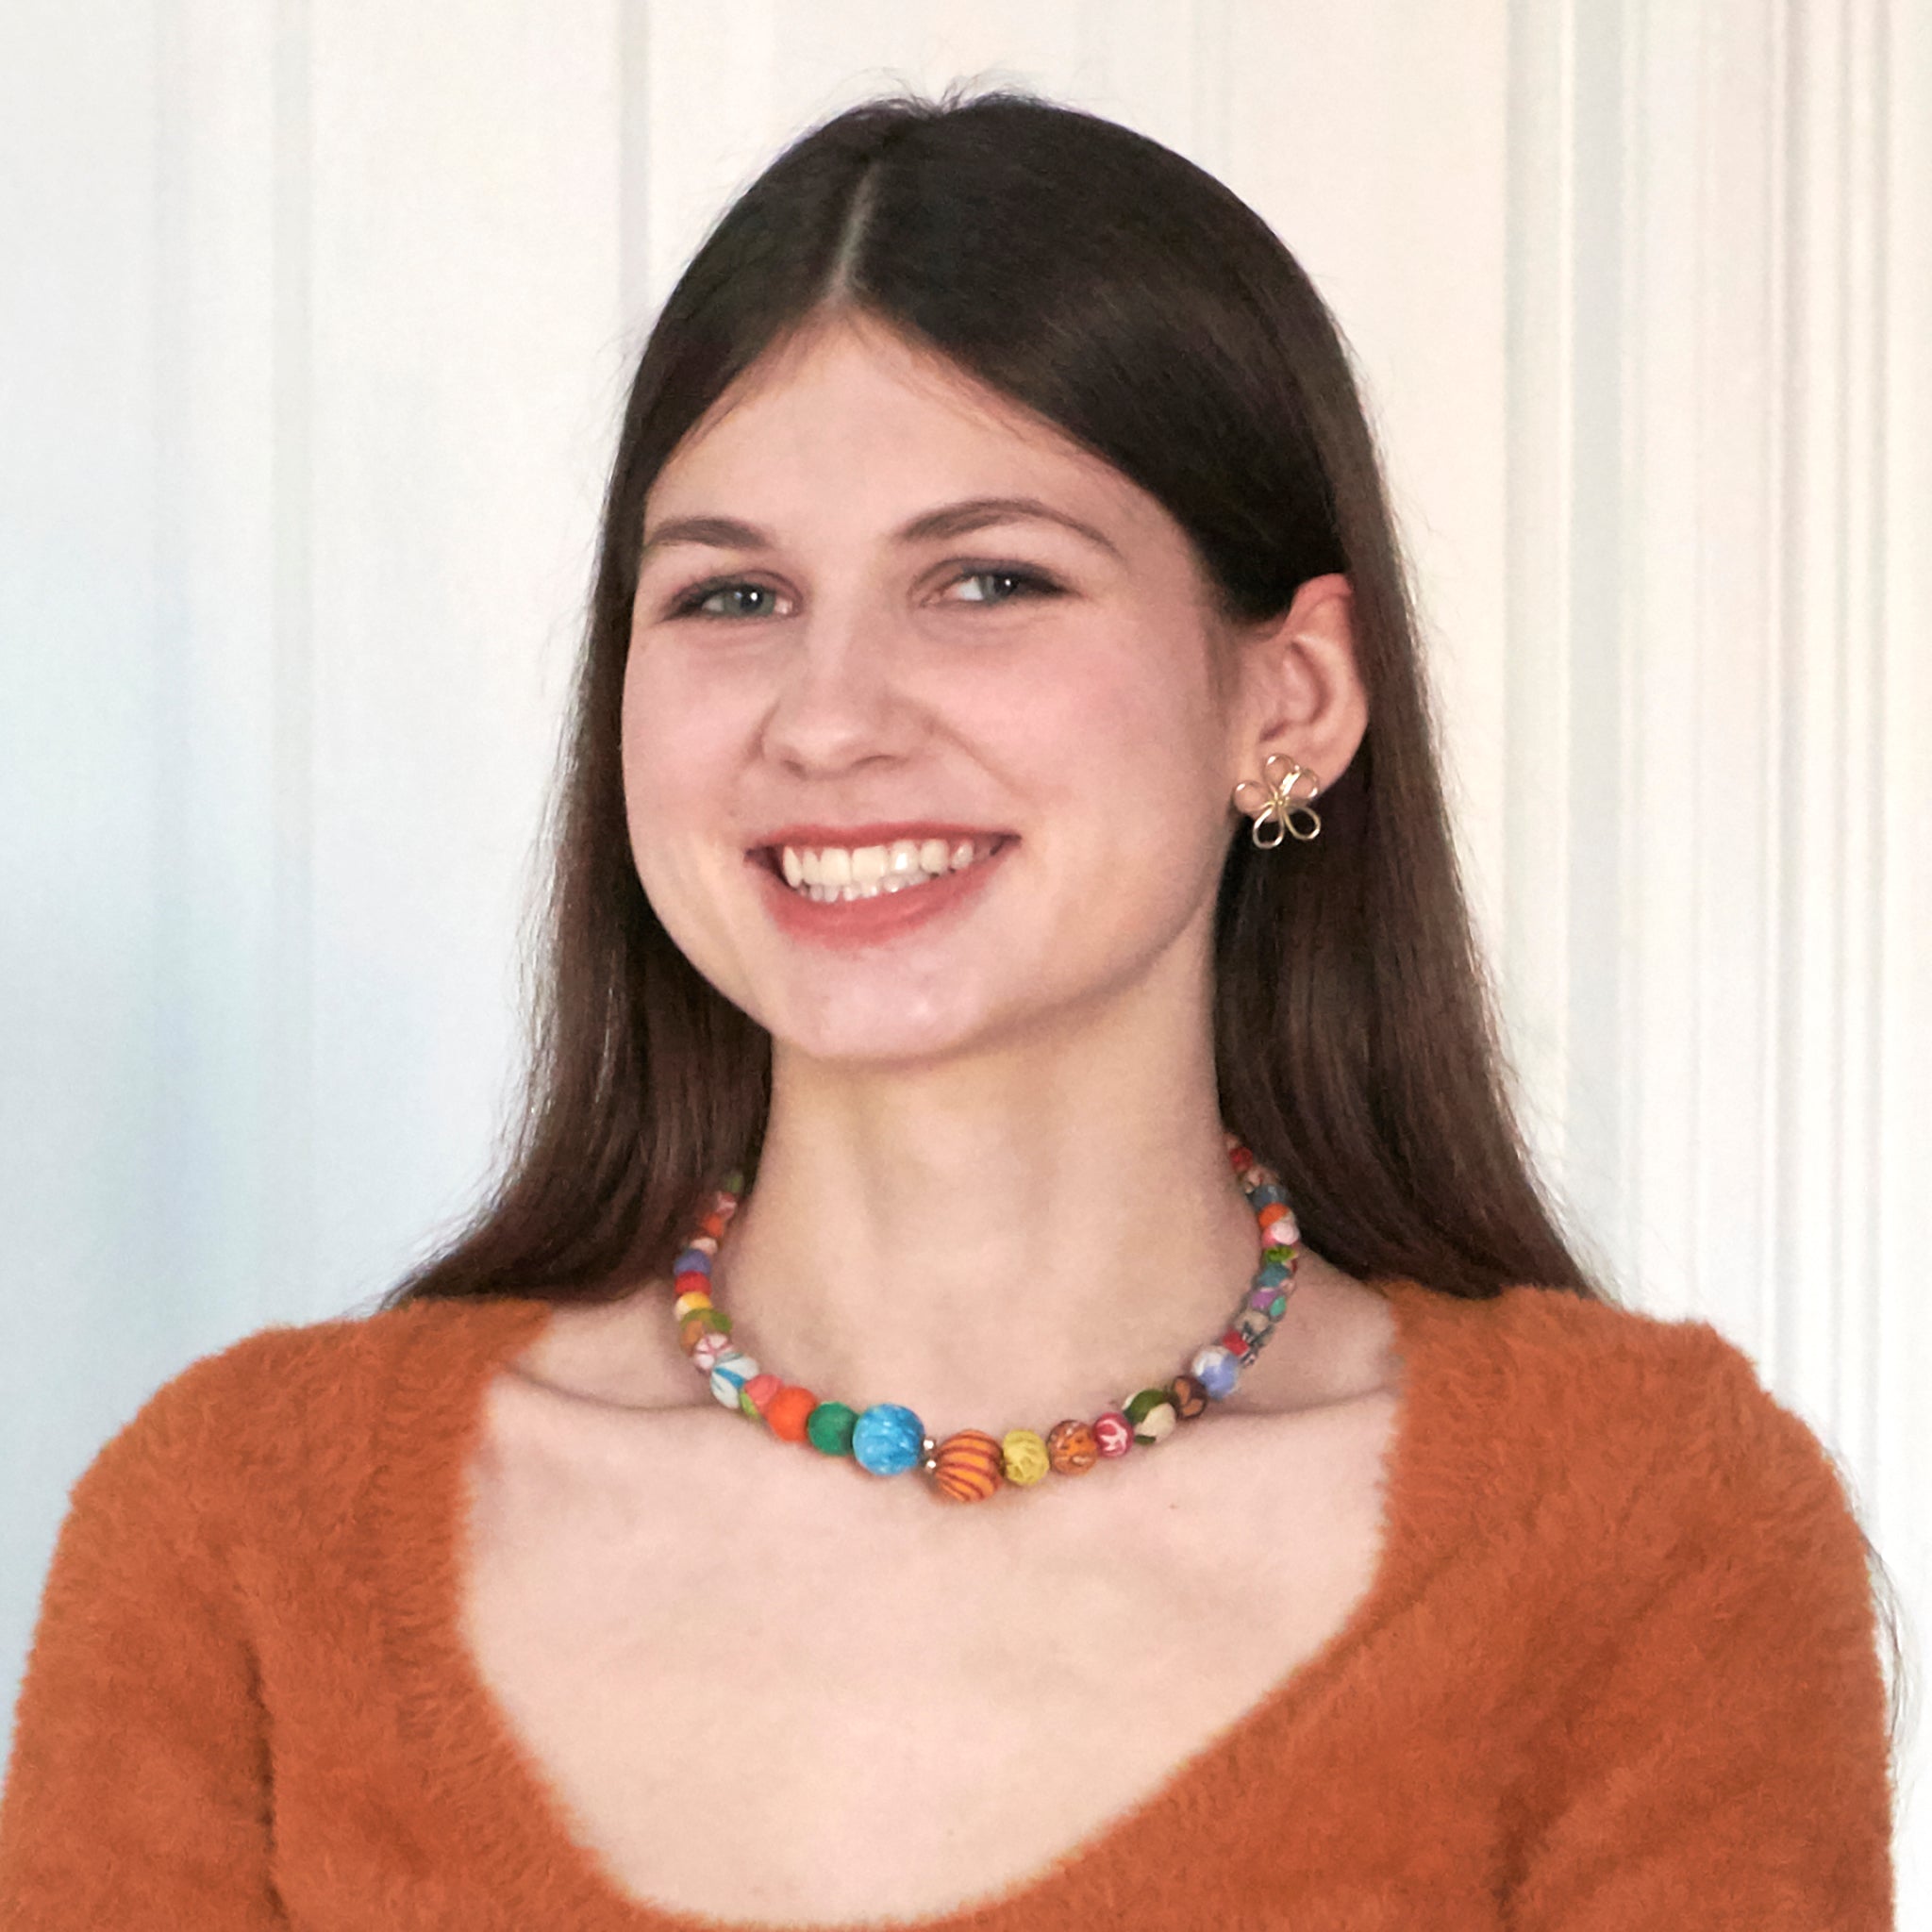 A woman smiles at us while modeling a colorful necklace.